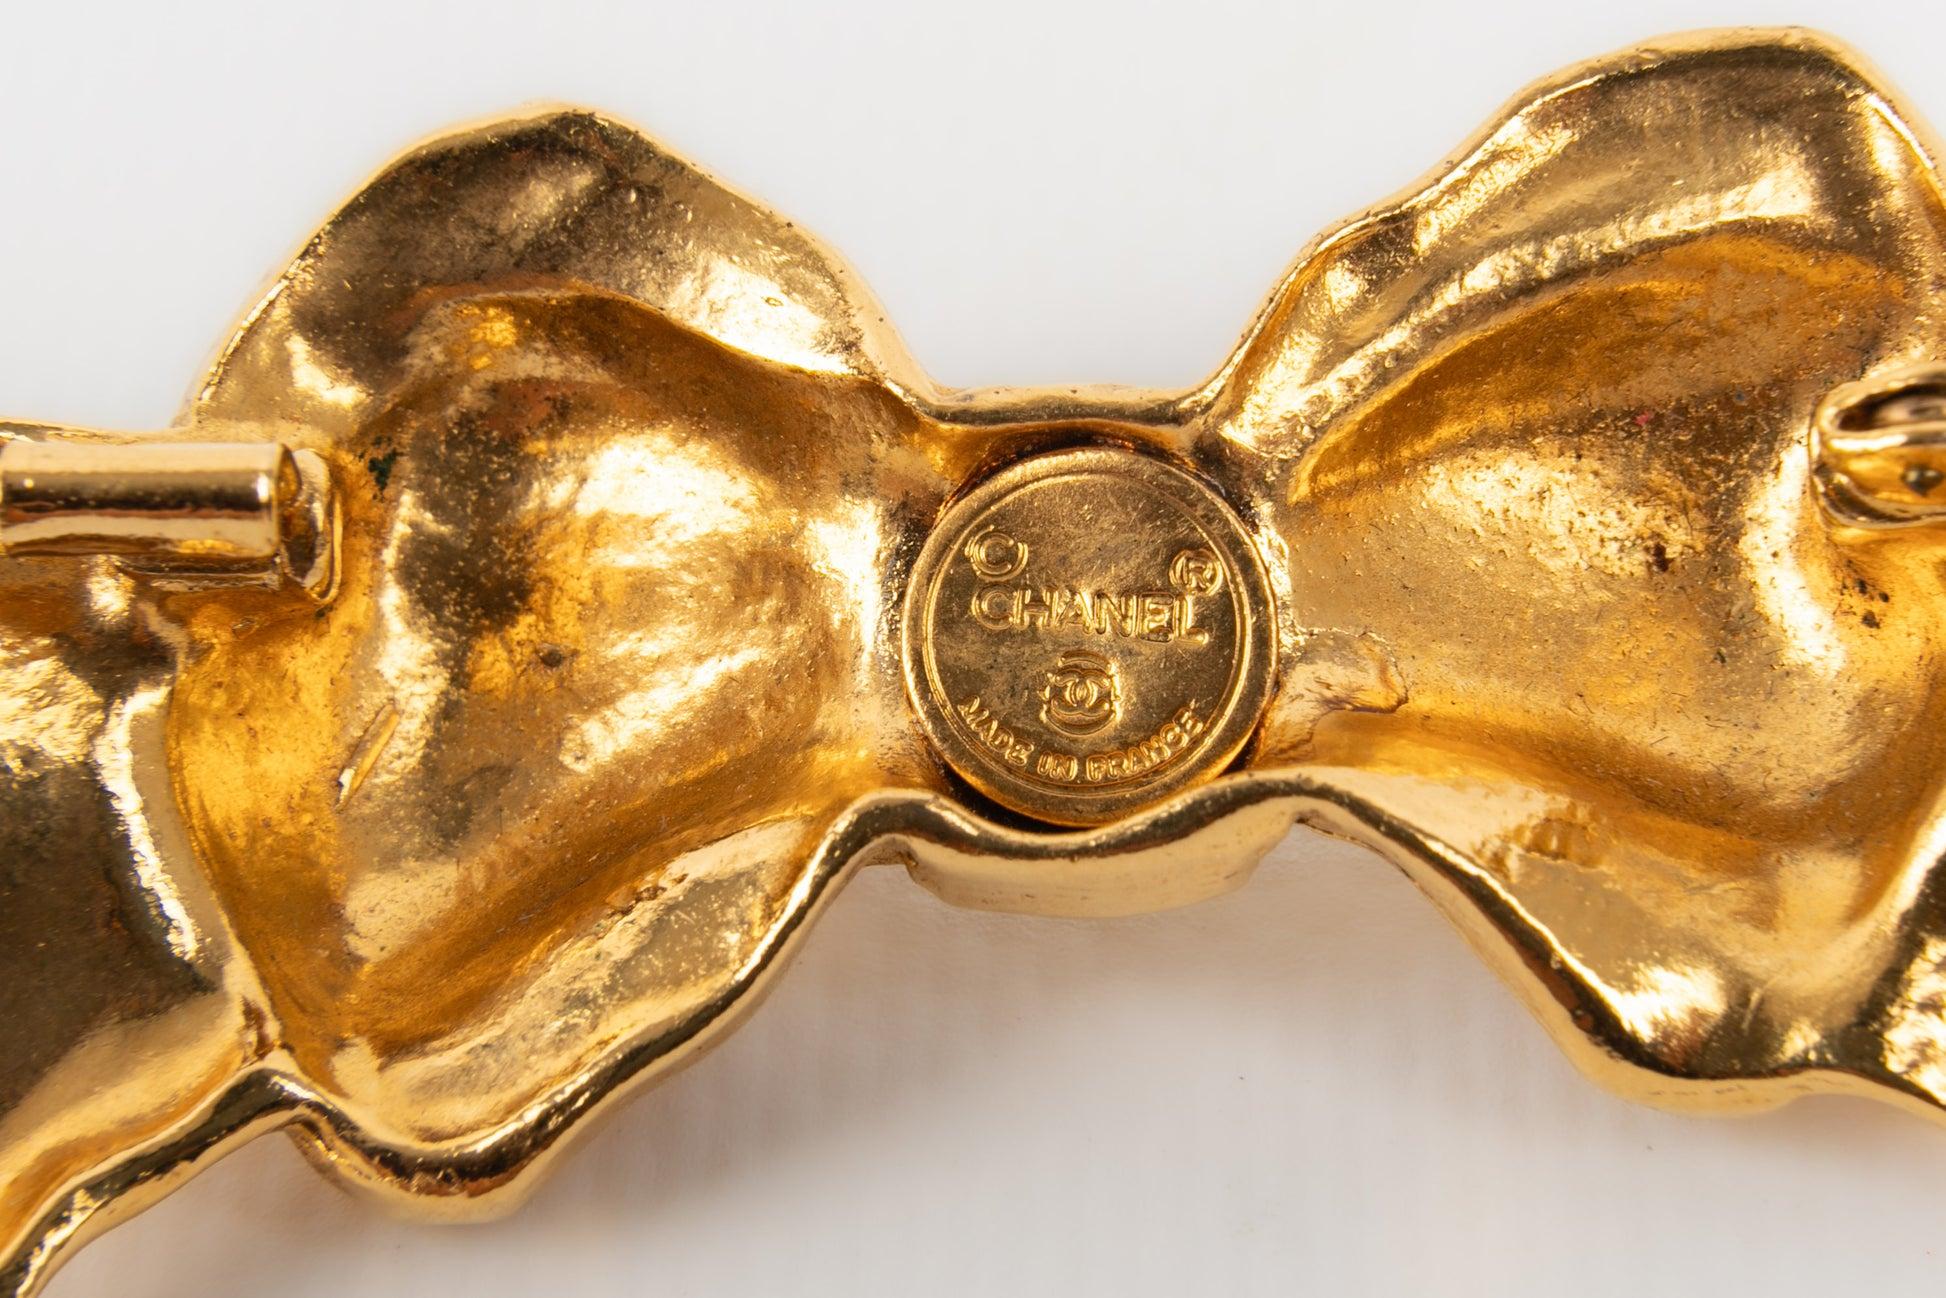 Women's Chanel Bow Brooch in Gold-Plated Metal Representing a Bow, 1990s For Sale